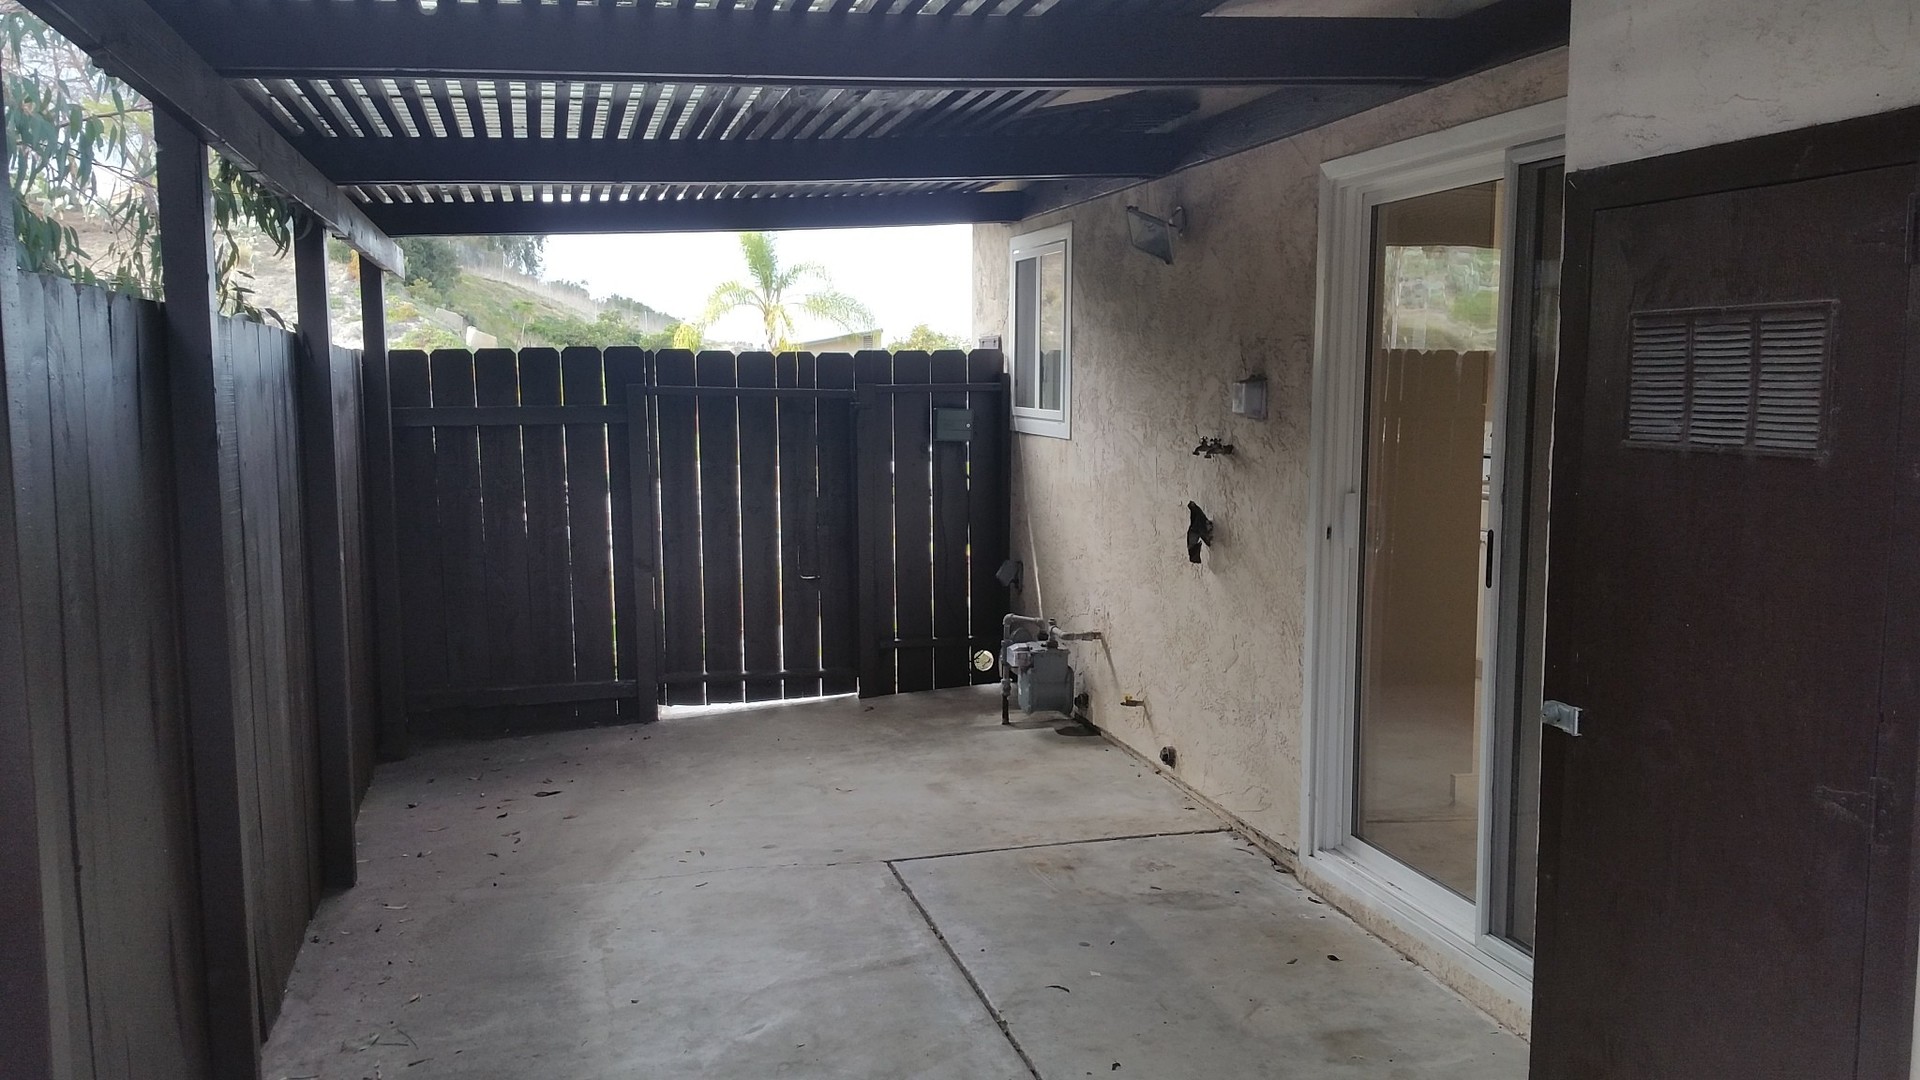 3 Bed / 2 Bath Home Backyard For Rent